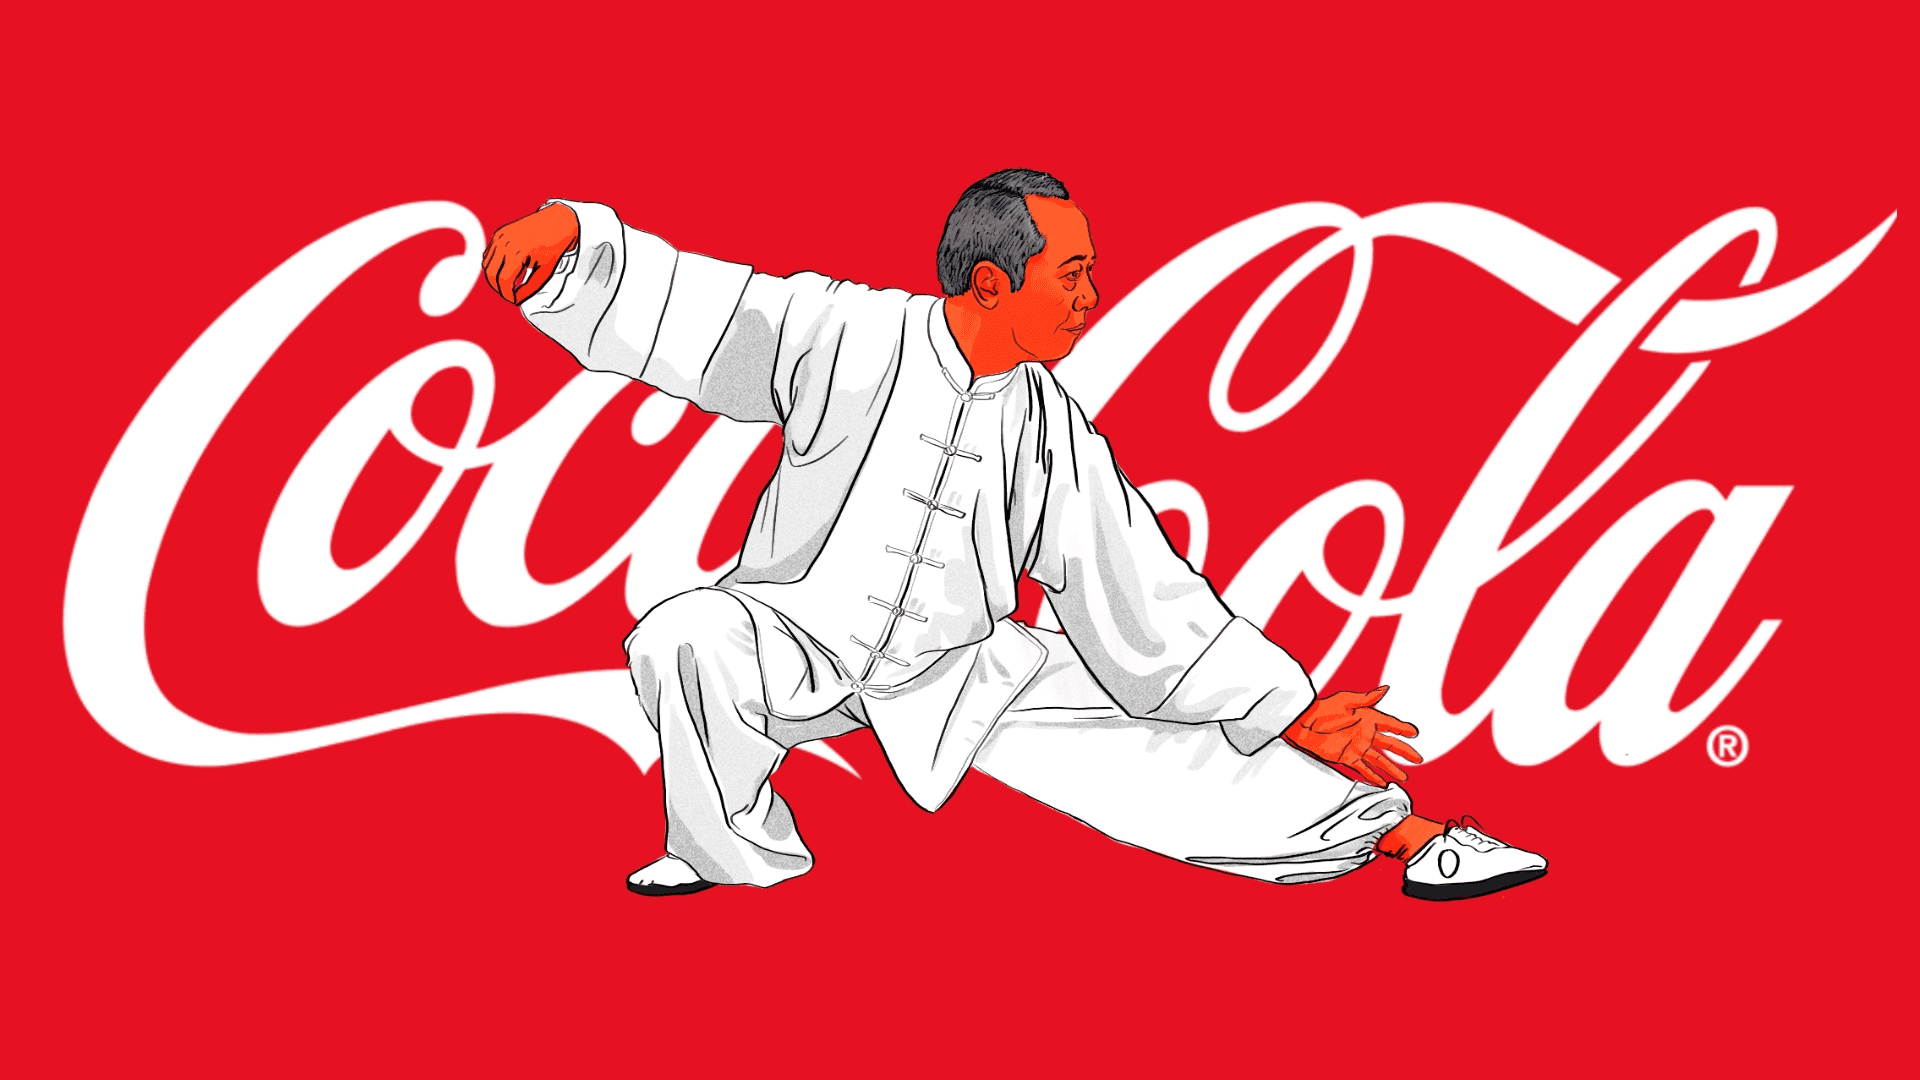 An illustration by Alex Santafe depicting a chinese man practicing Tai Chi behind a Coca-Cola logo